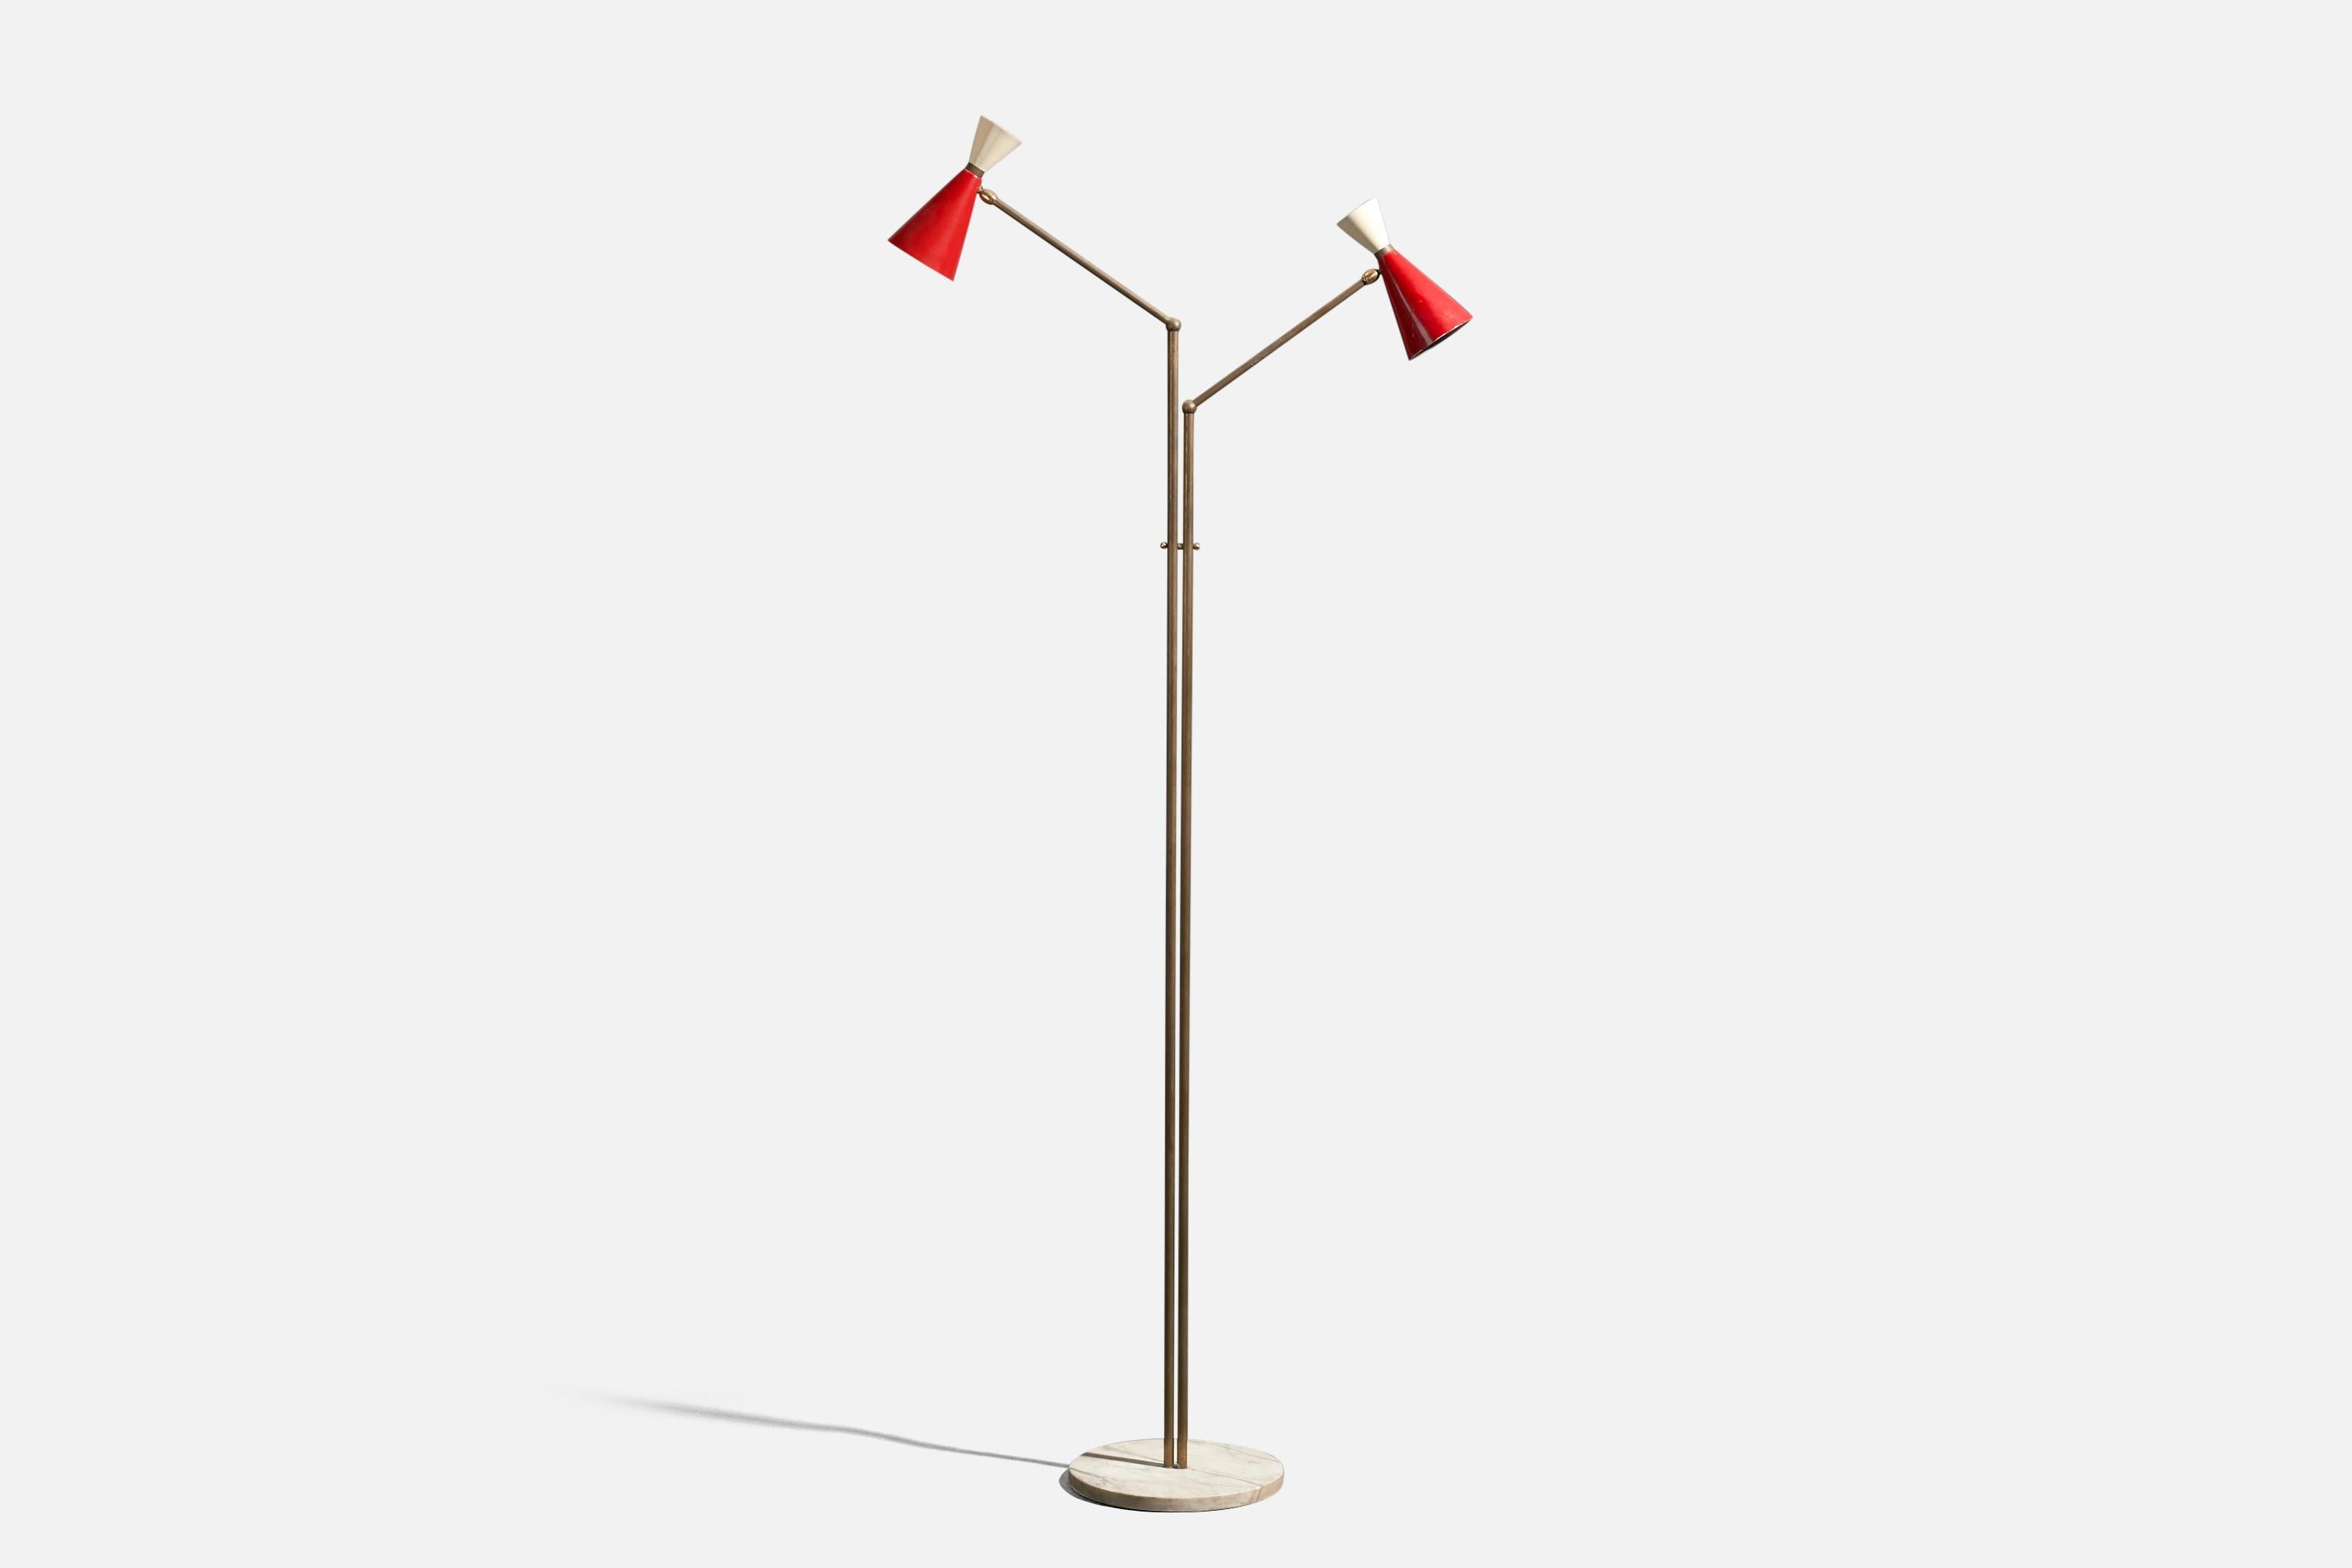 A tall and adjustable, brass, marble and red and white-lacquered metal floor lamp designed and produced in Italy, 1950s.

Dimensions variable, measured as illustrated in first image.

Sockets take E-14 bulbs.

There is no maximum wattage